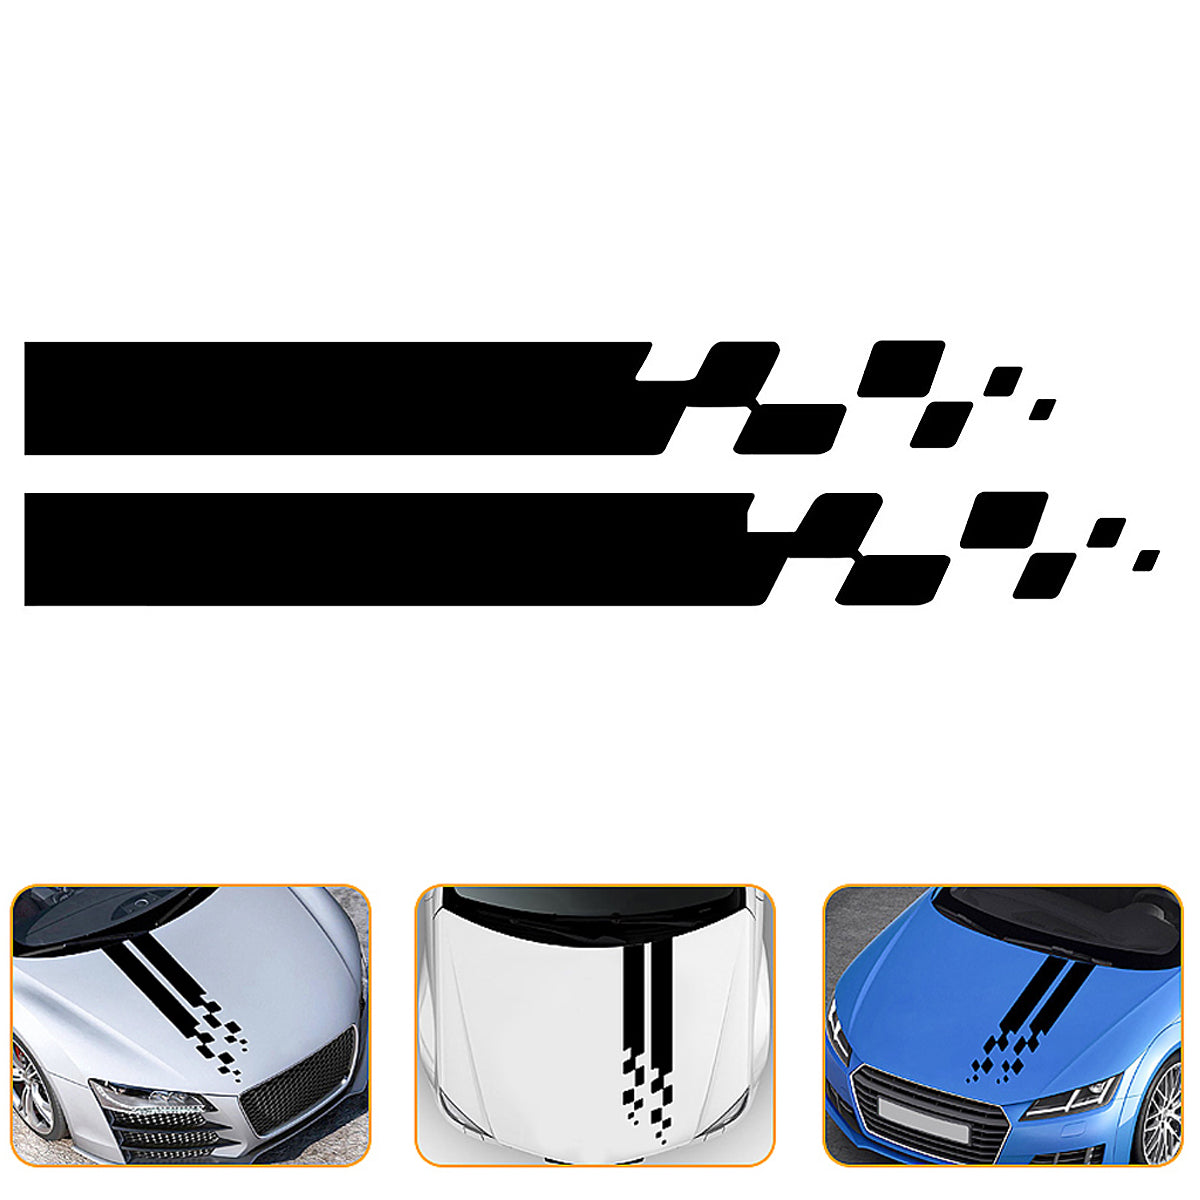 Black Universal Car Auto Hood DIY Sticker Engine Cover Scratched Styling Decal Decoration